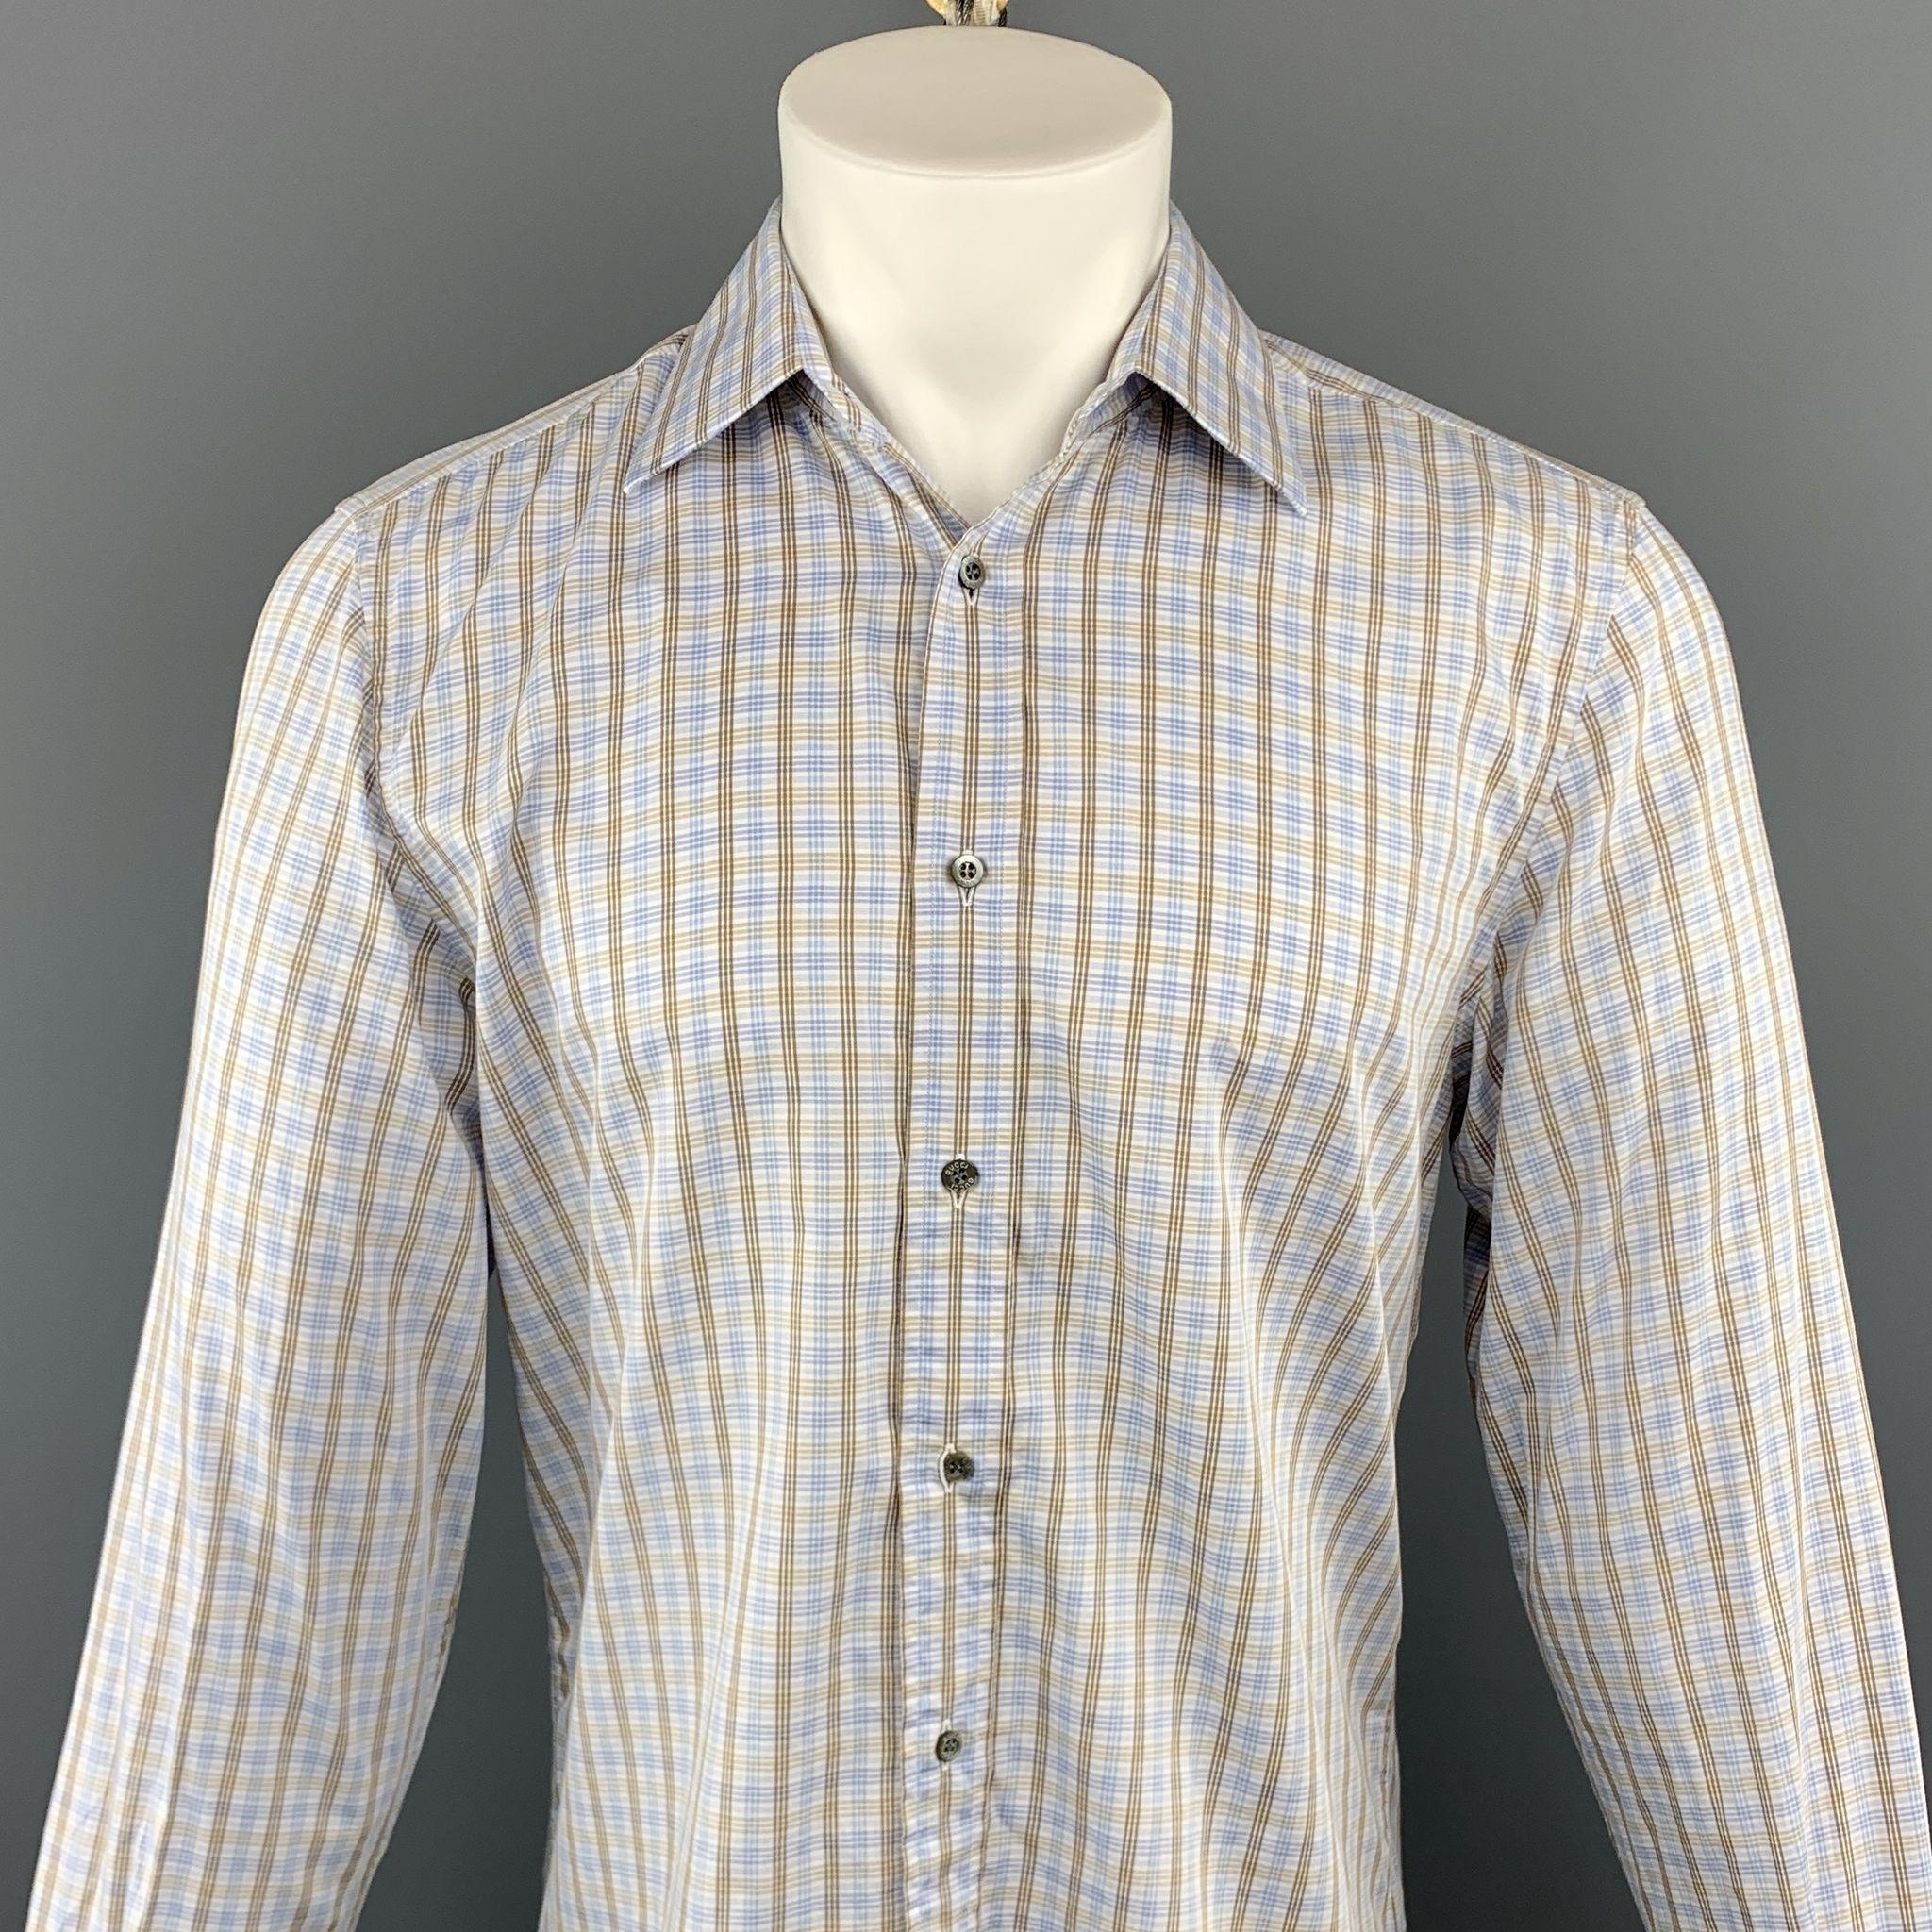 GUCCI long sleeve shirt comes in a blue and brown plaid cotton featuring a button up style and a spread collar. Made in Italy.
 
Excellent Pre-Owned Condition.
Marked: 41
 
Measurements:
 
Shoulder: 17 in.
Chest: 44 in.
Sleeve: 27 in.
Length: 27 in.